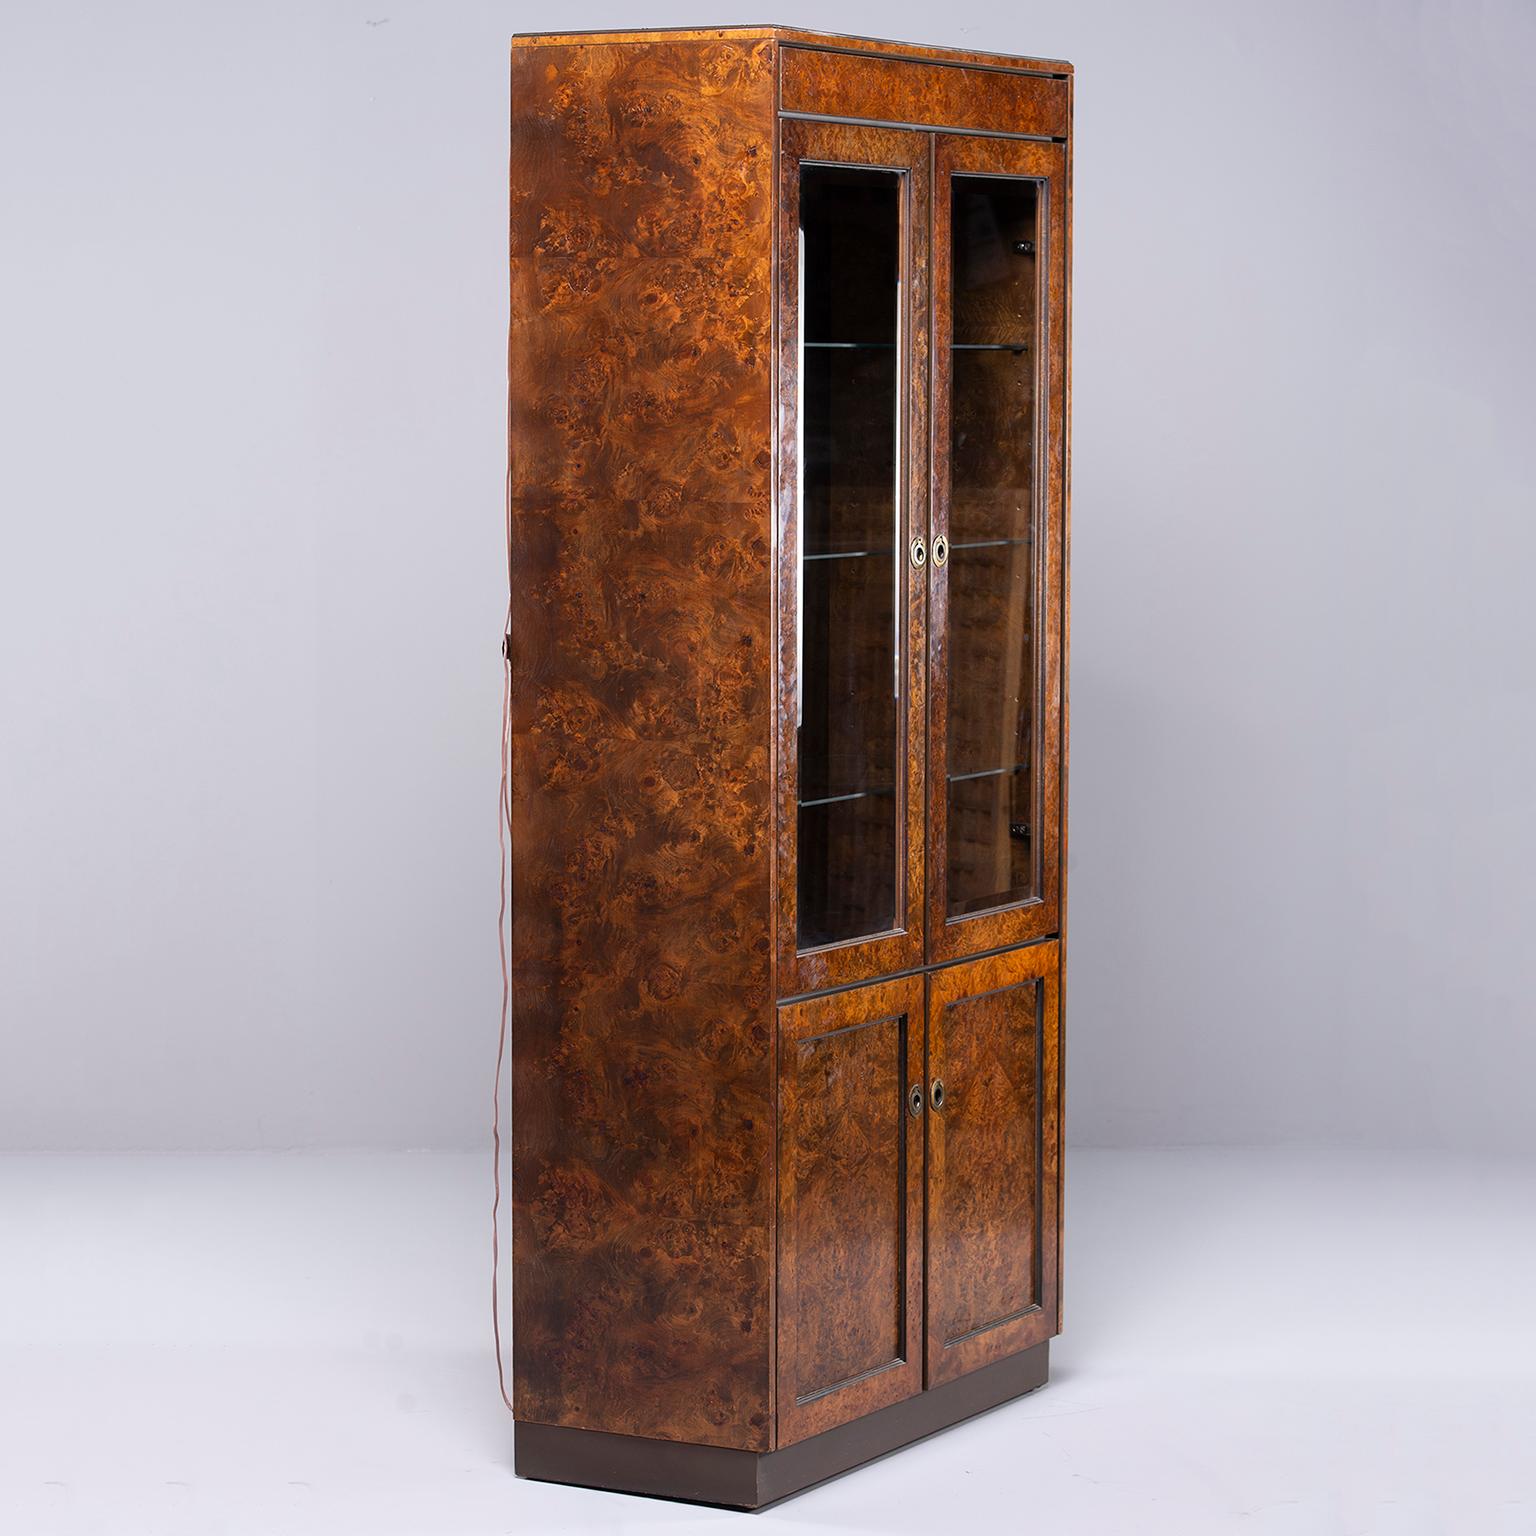 Widdicomb dark burled olive wood cabinet has lower storage compartment with two hinged wood doors, circa 1970s. Top compartment features beveled edge glass front hinged doors and glass shelves with interior light on inside of top. Dark brass